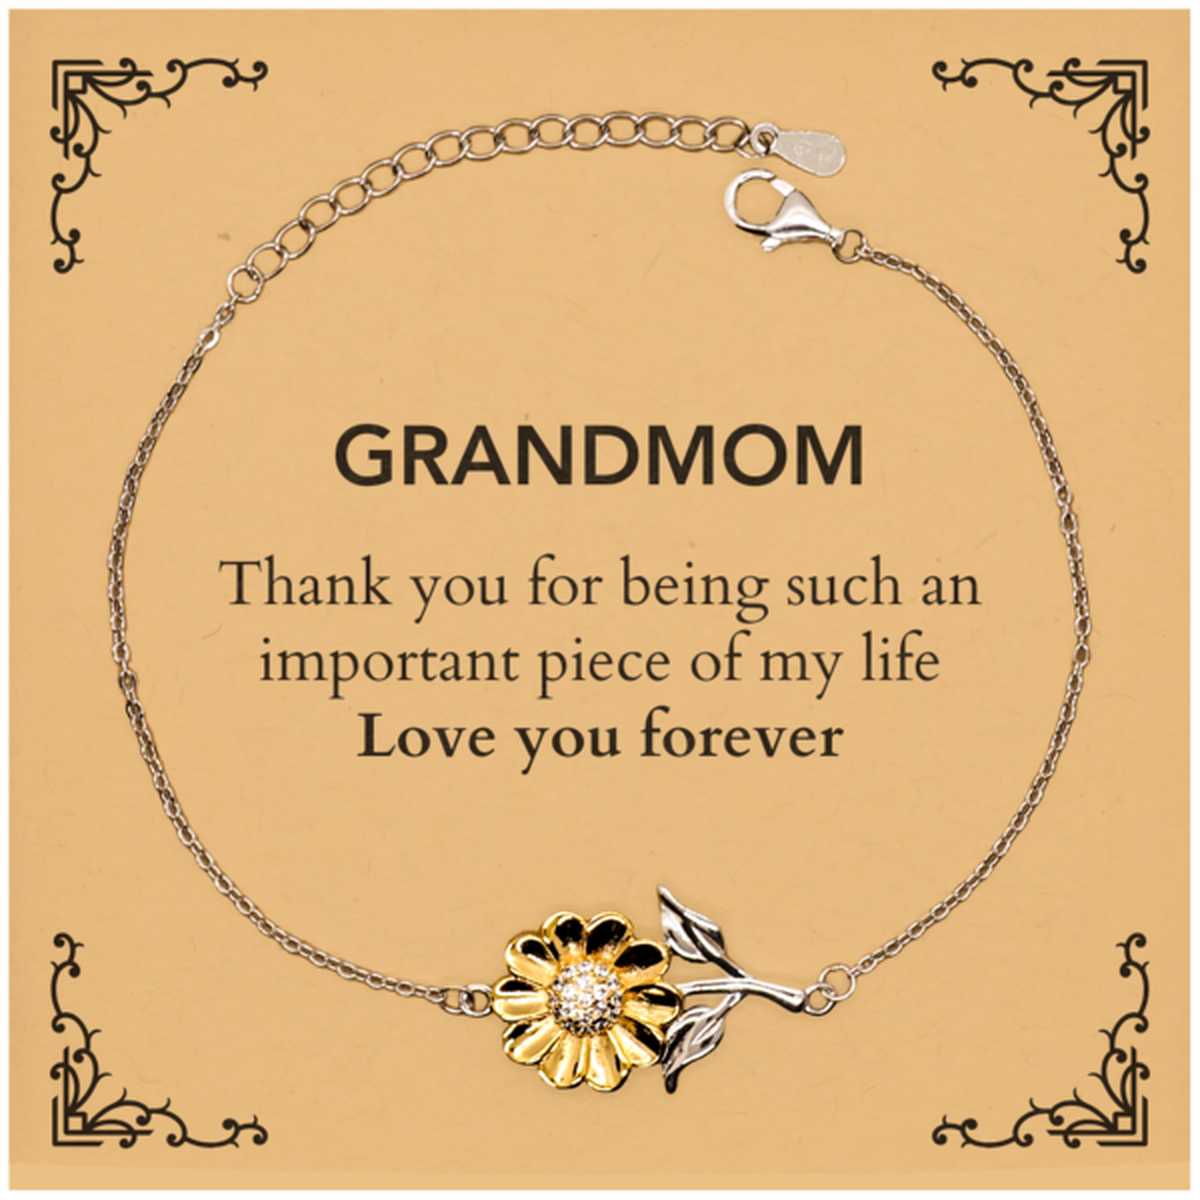 Appropriate Grandmom Sunflower Bracelet Epic Birthday Gifts for Grandmom Thank you for being such an important piece of my life Grandmom Christmas Mothers Fathers Day